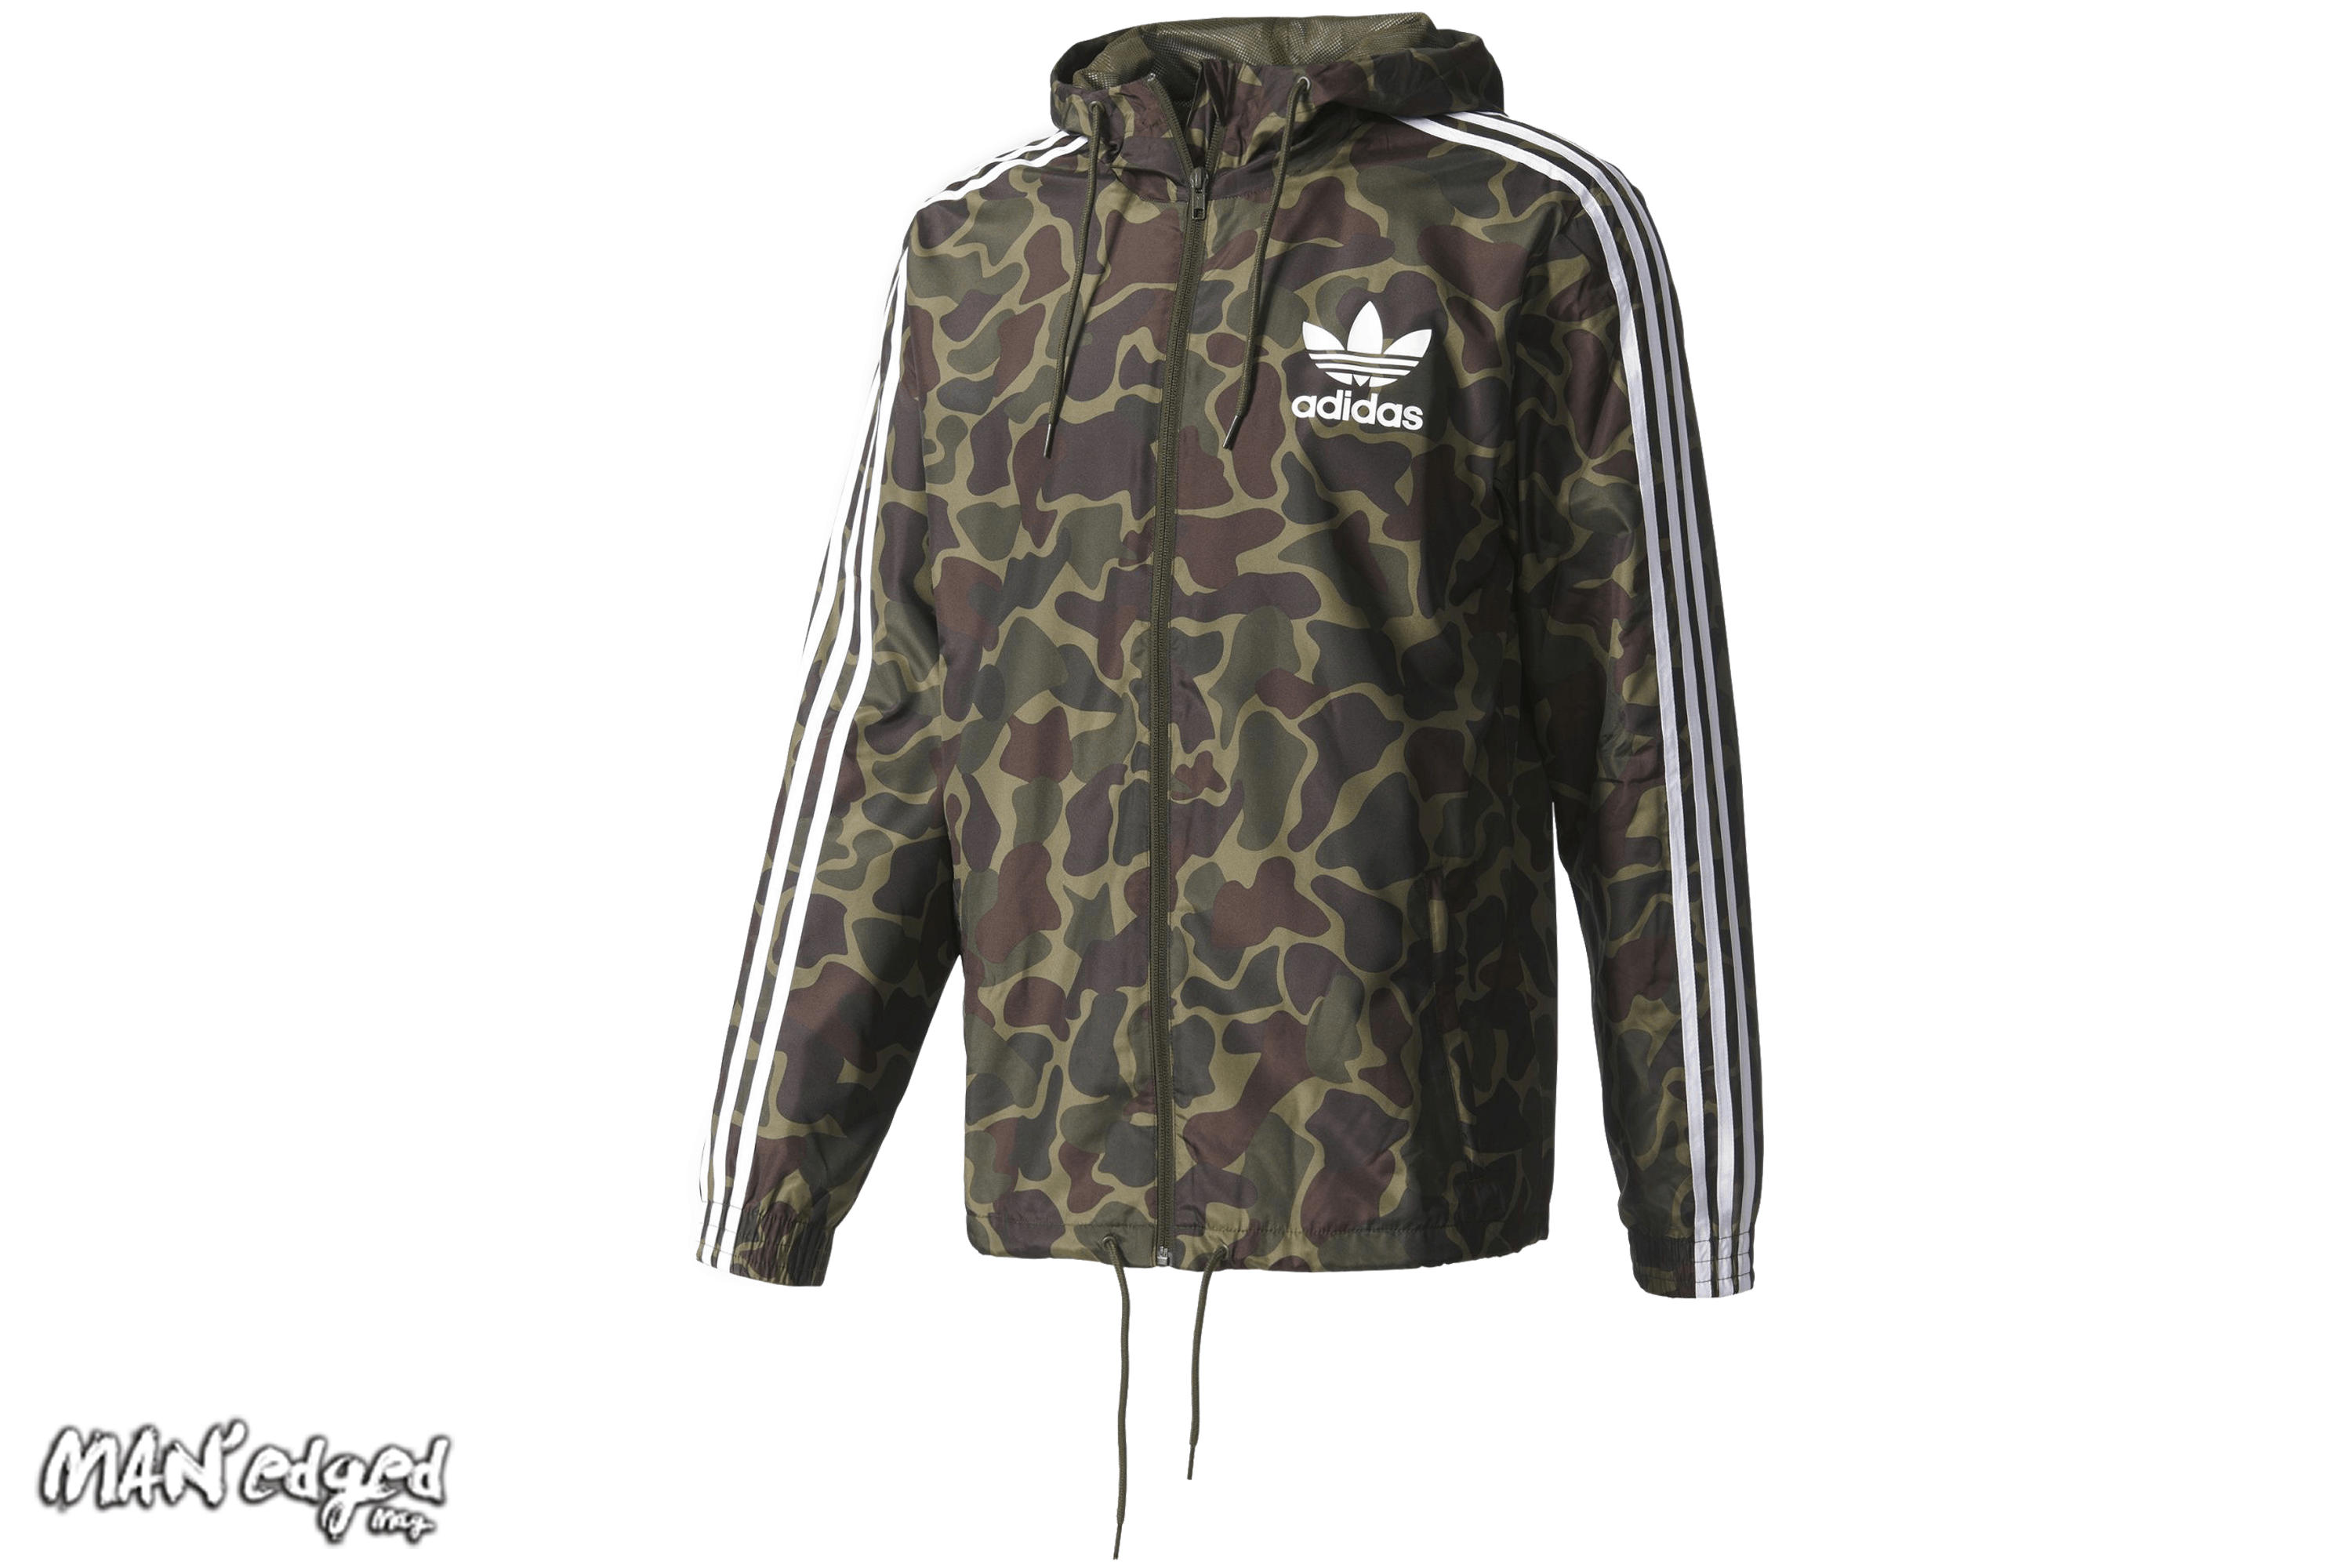 Men's green camouflage windbreaker jacket by Adidas, featured in MAN'edged Magazine St Patricks Day men's style round up